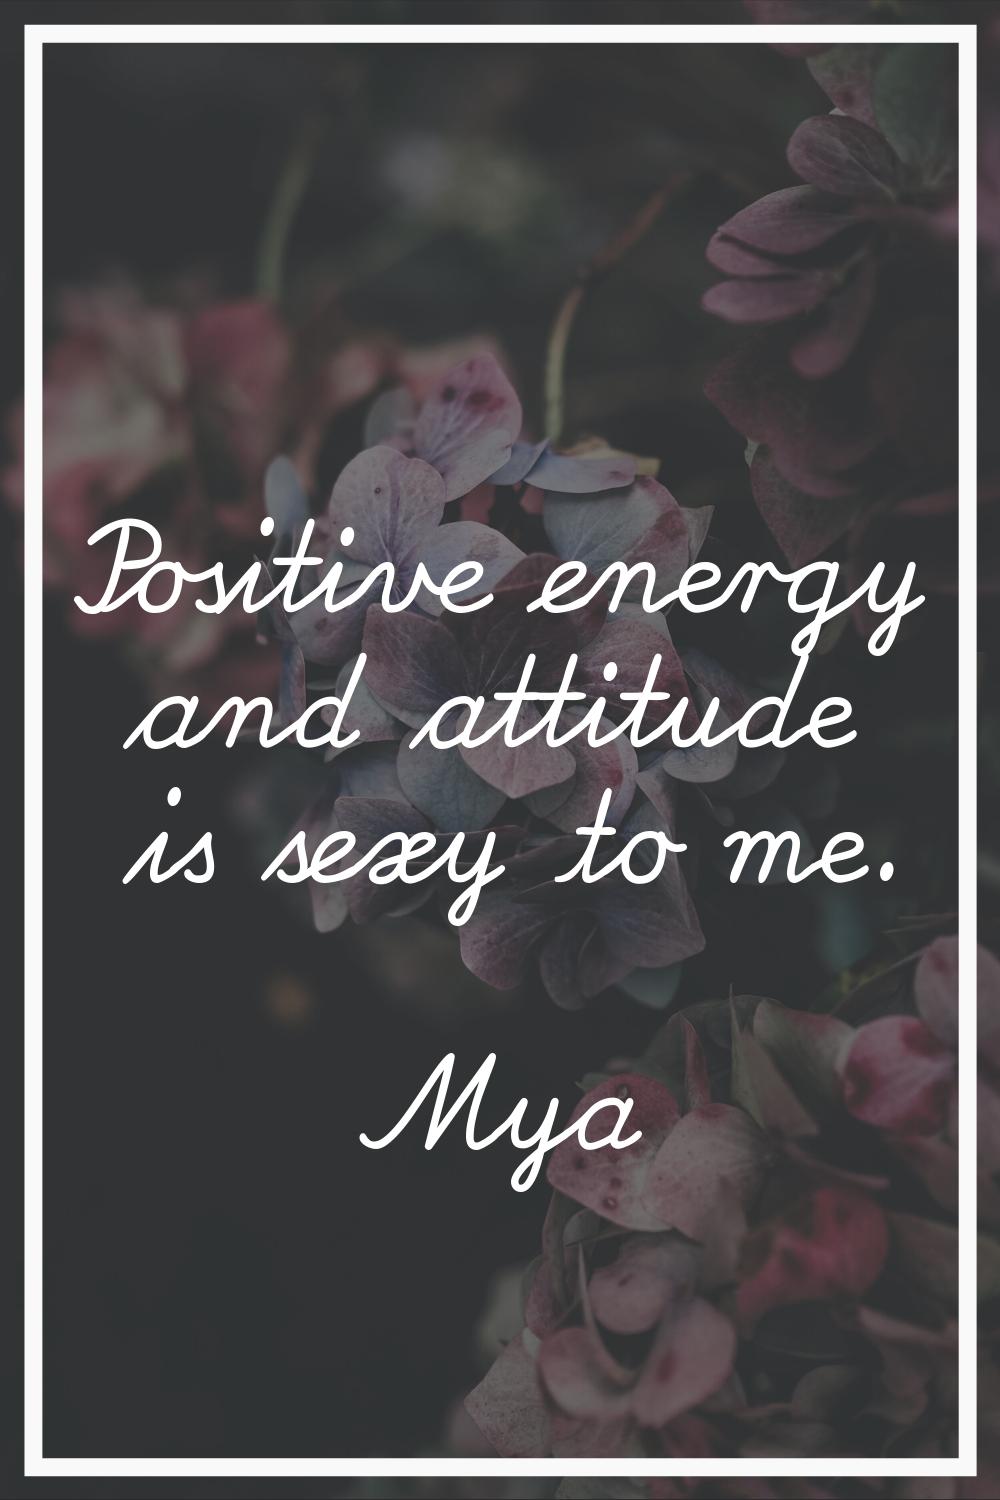 Positive energy and attitude is sexy to me.